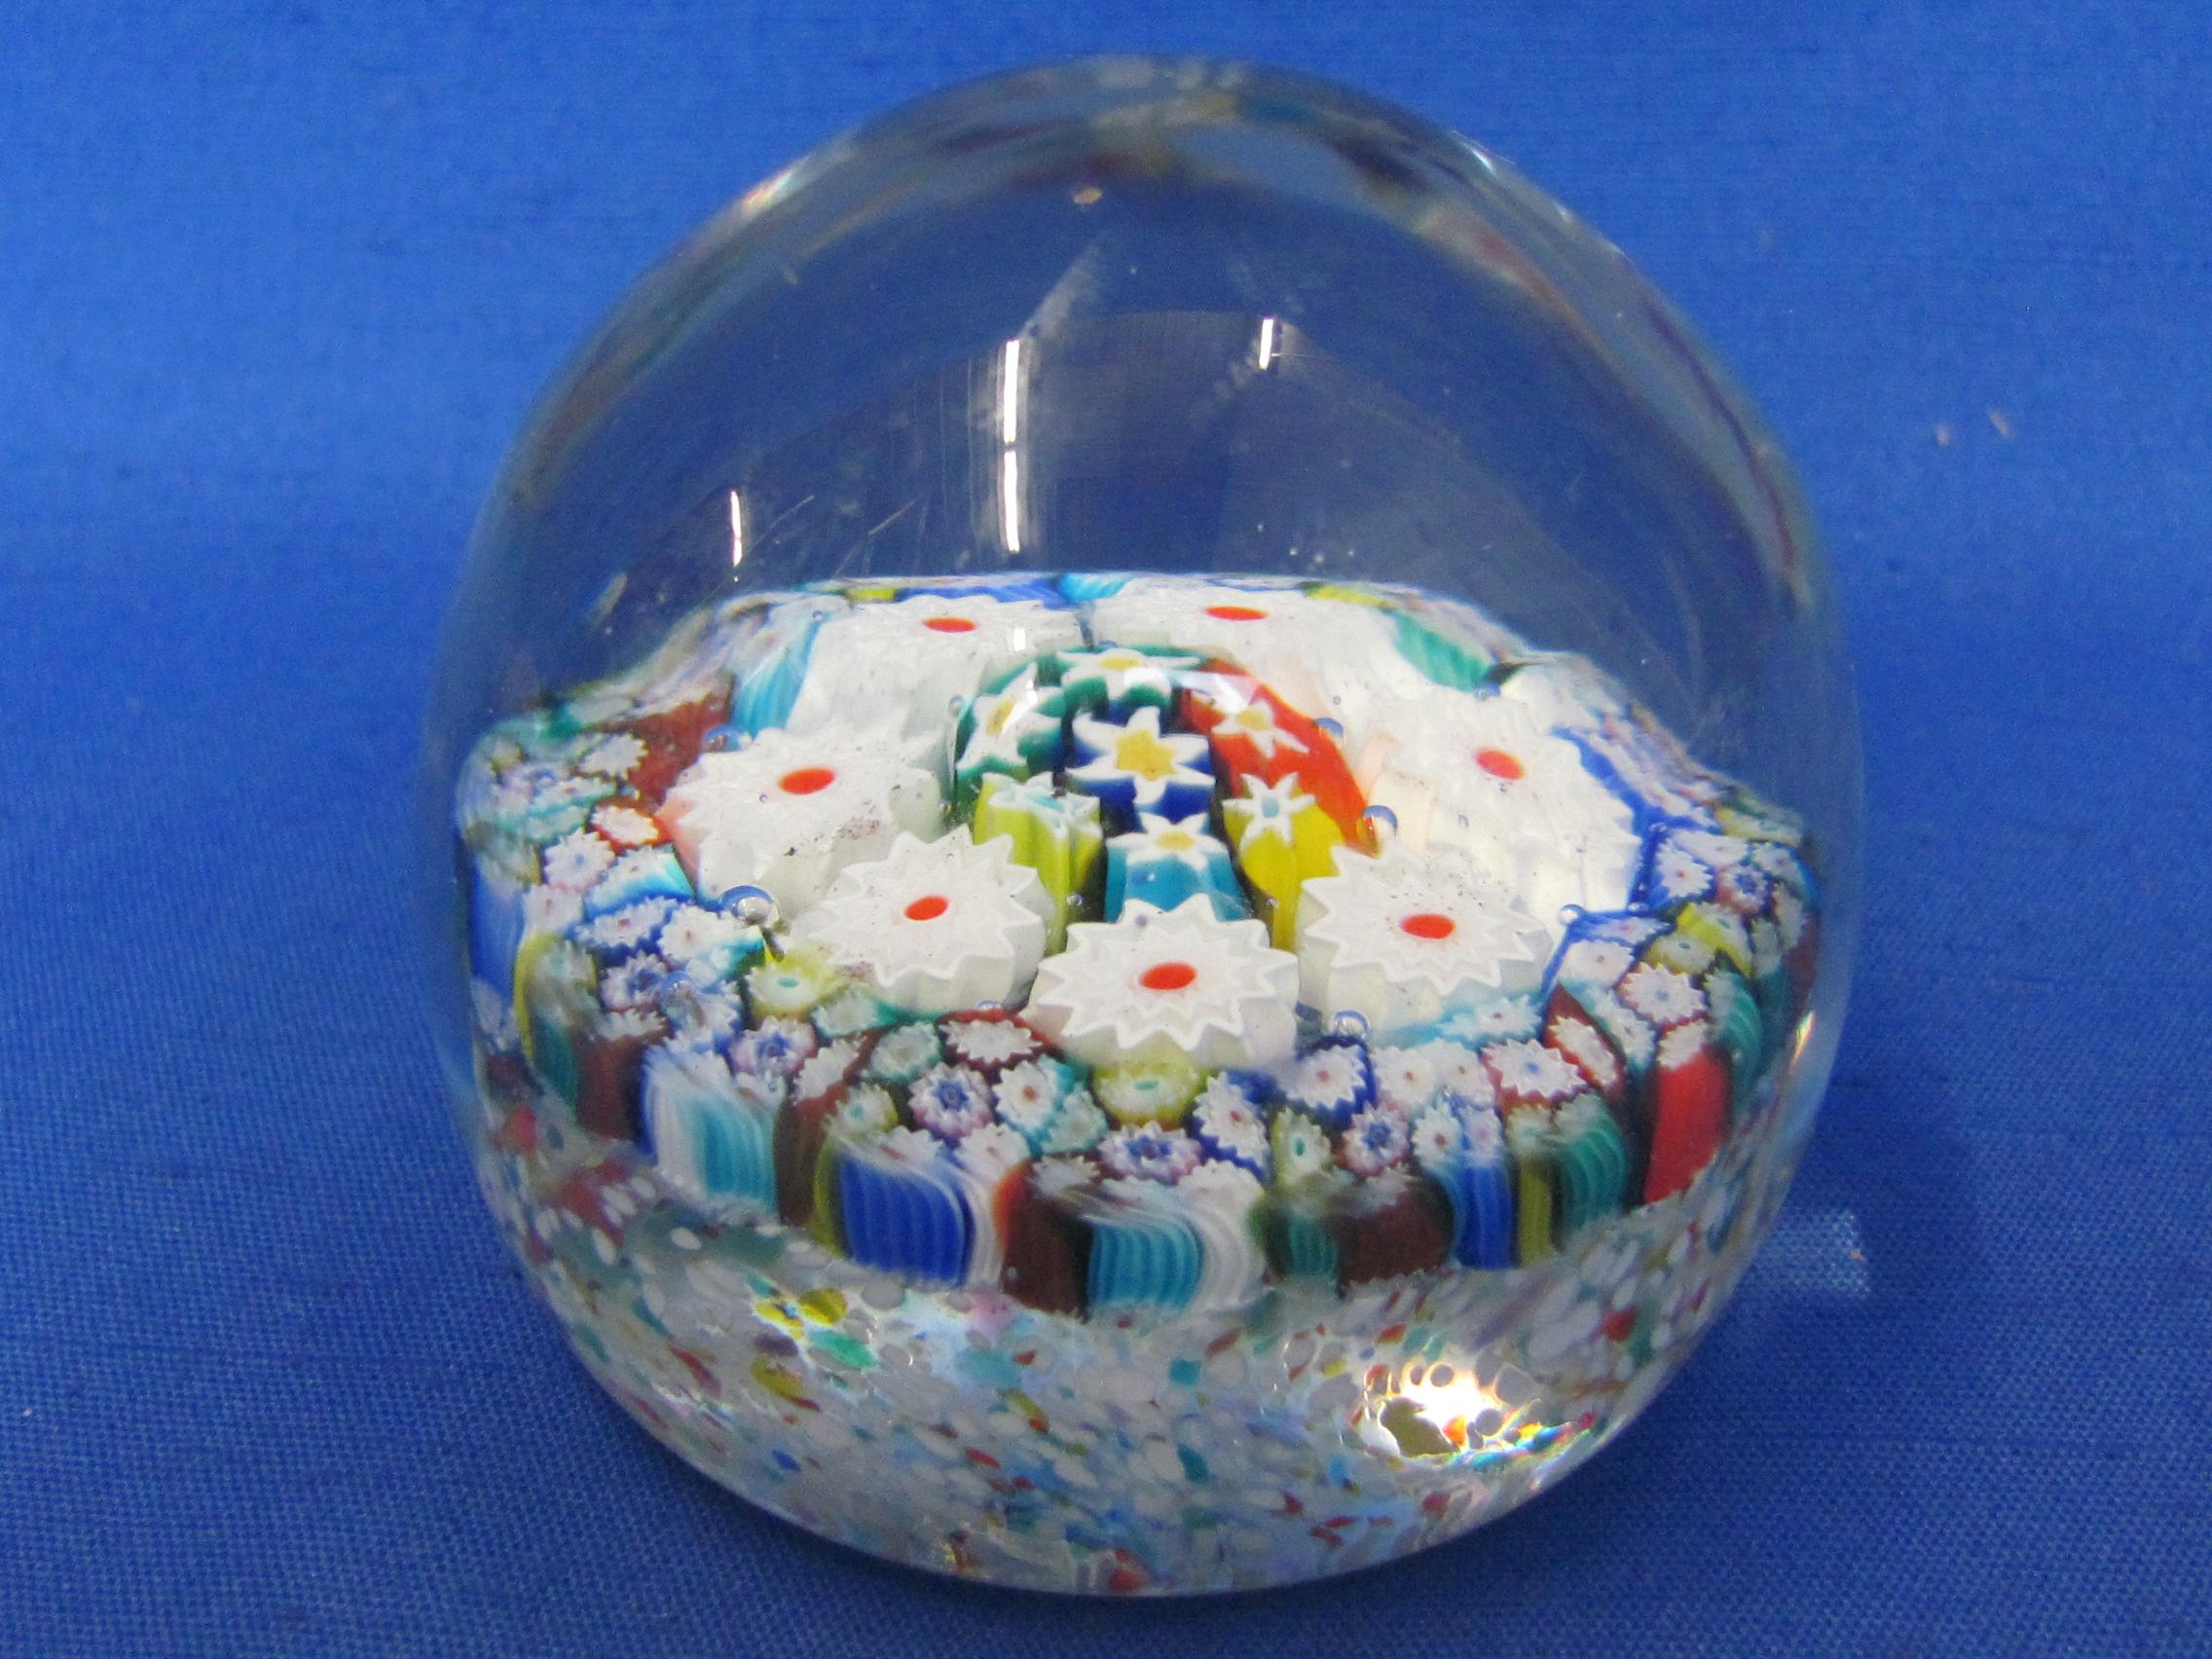 2 Glass Paperweights – Millifiori Style – Larger is 2 1/2” in diameter